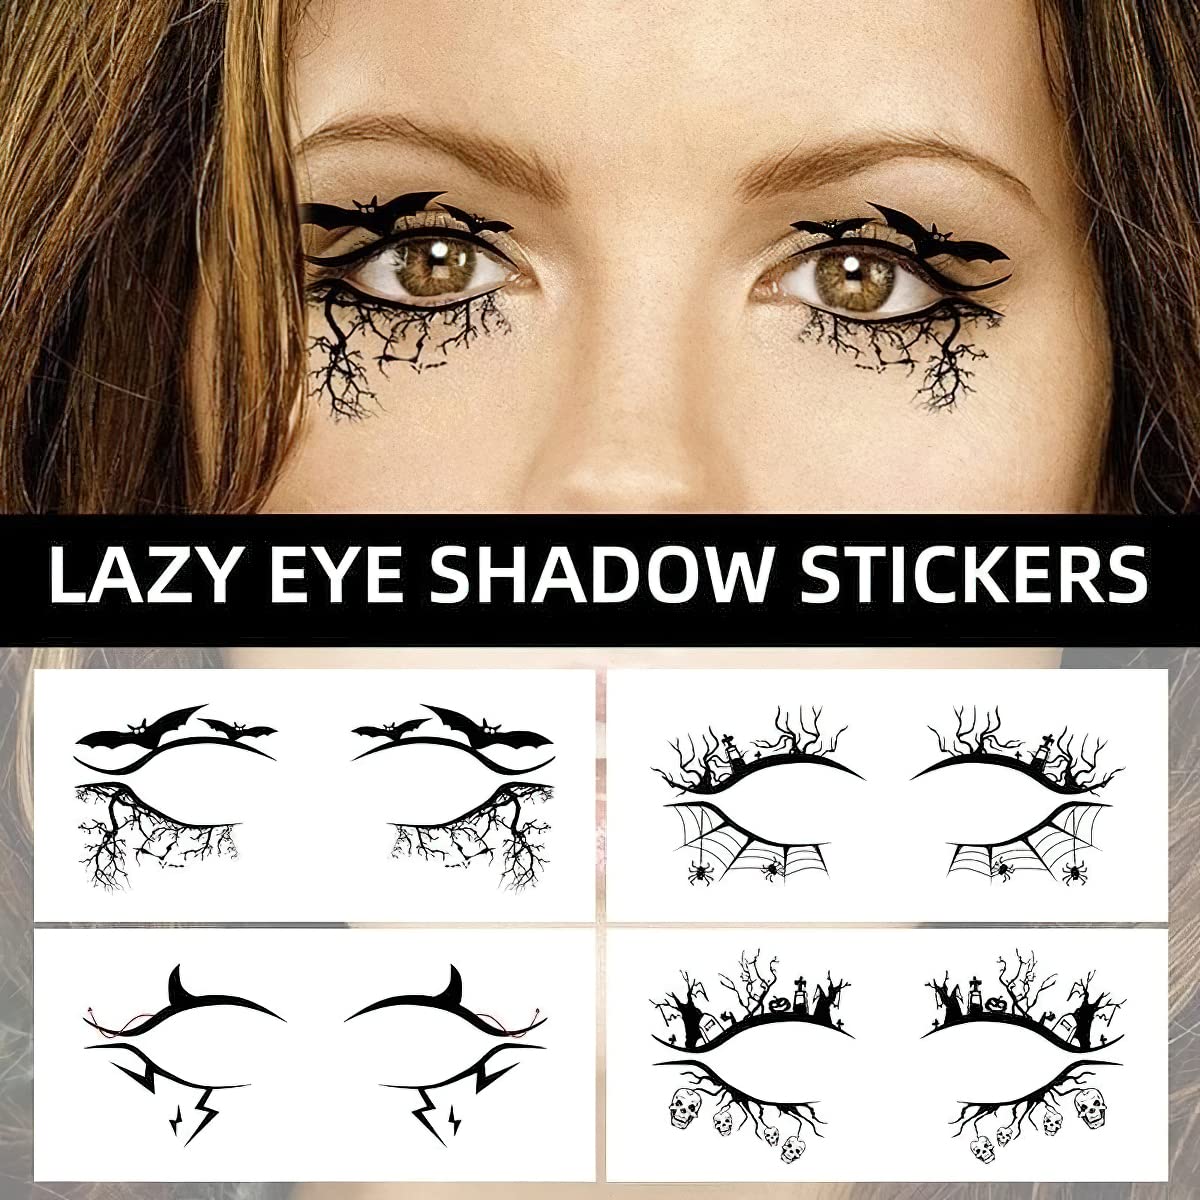 AUOCATTAIL 4 Pcs Halloween Face Tattoo Stickers Scary Spider, Skull & Bat Designs for Women, Girls, and Masquerade Parties Temporary Tattoo Stickers for Face and Body Halloween Makeup Essential